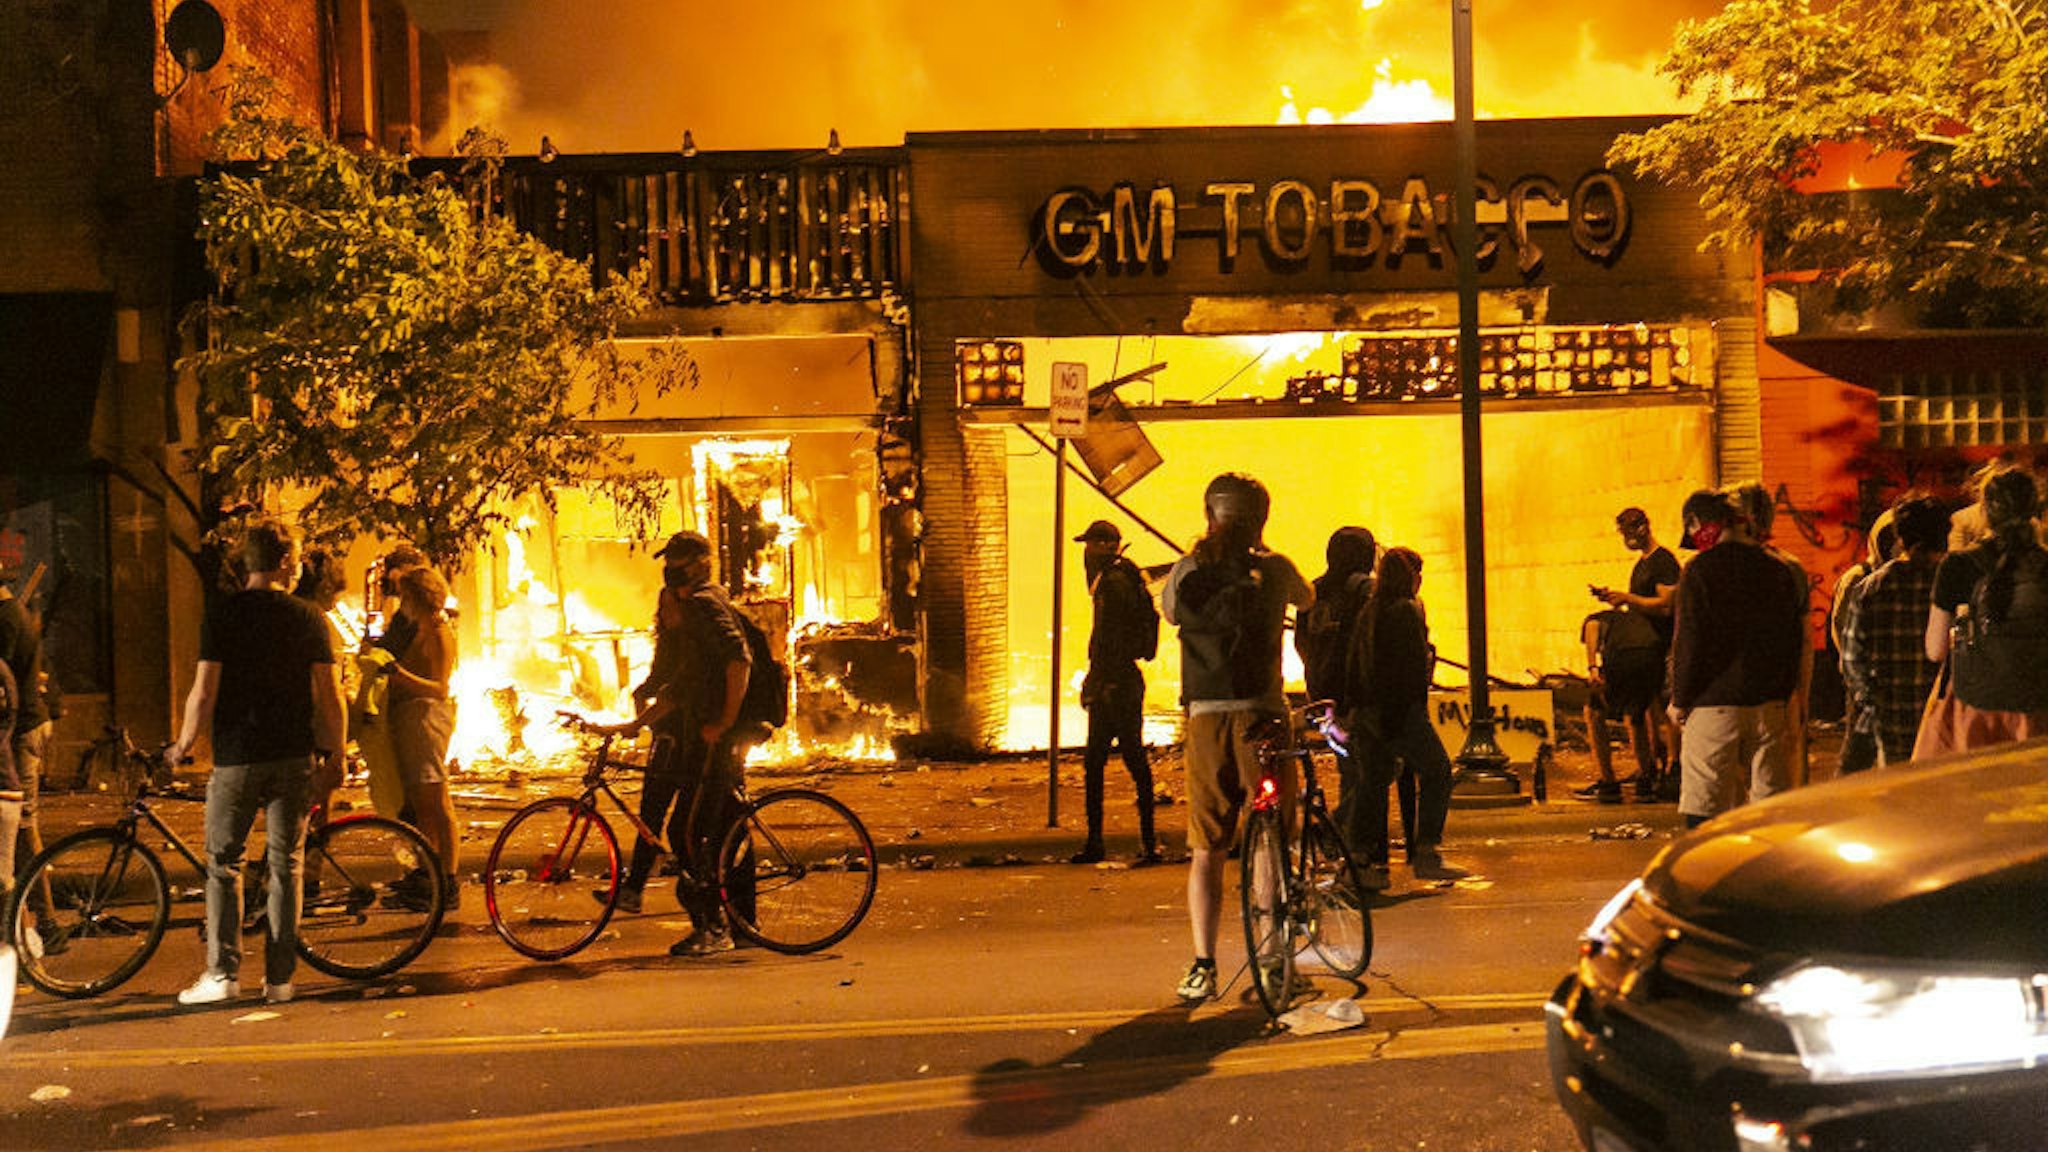 Protestors set a shop on fire on Thursday, May 28, 2020, during the third day of protests over the death of George Floyd in Minneapolis. Floyd died in police custody in Minneapolis on Monday night, after an officer held his knee into Floyd's neck for more than 5 minutes. (Photo by Jordan Strowder/Anadolu Agency via Getty Images)